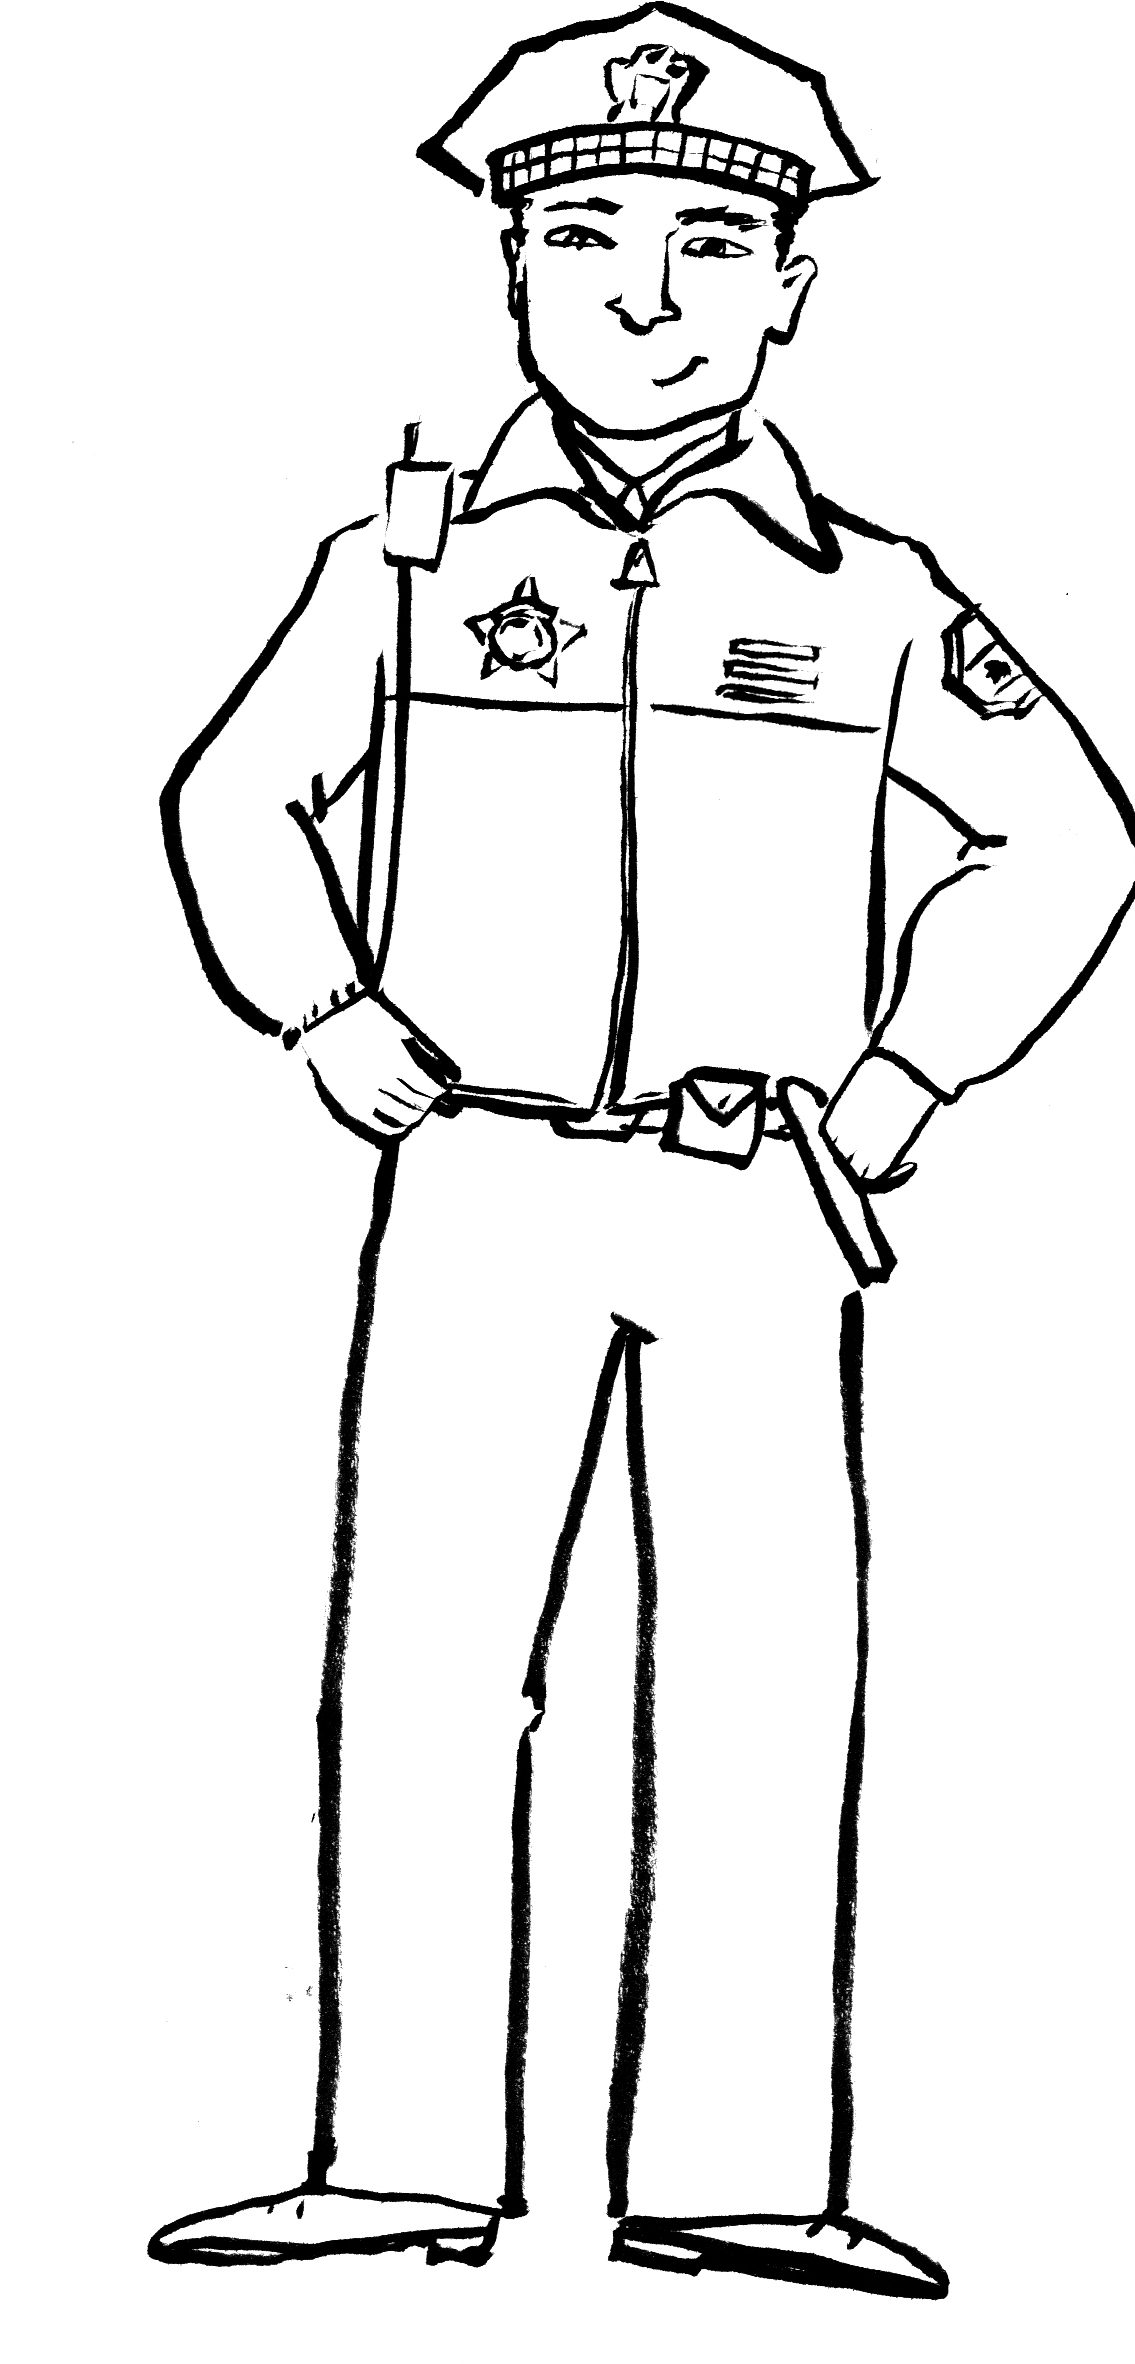  Police Coloring Pages| Coloring pages to print | Color Printing | #27